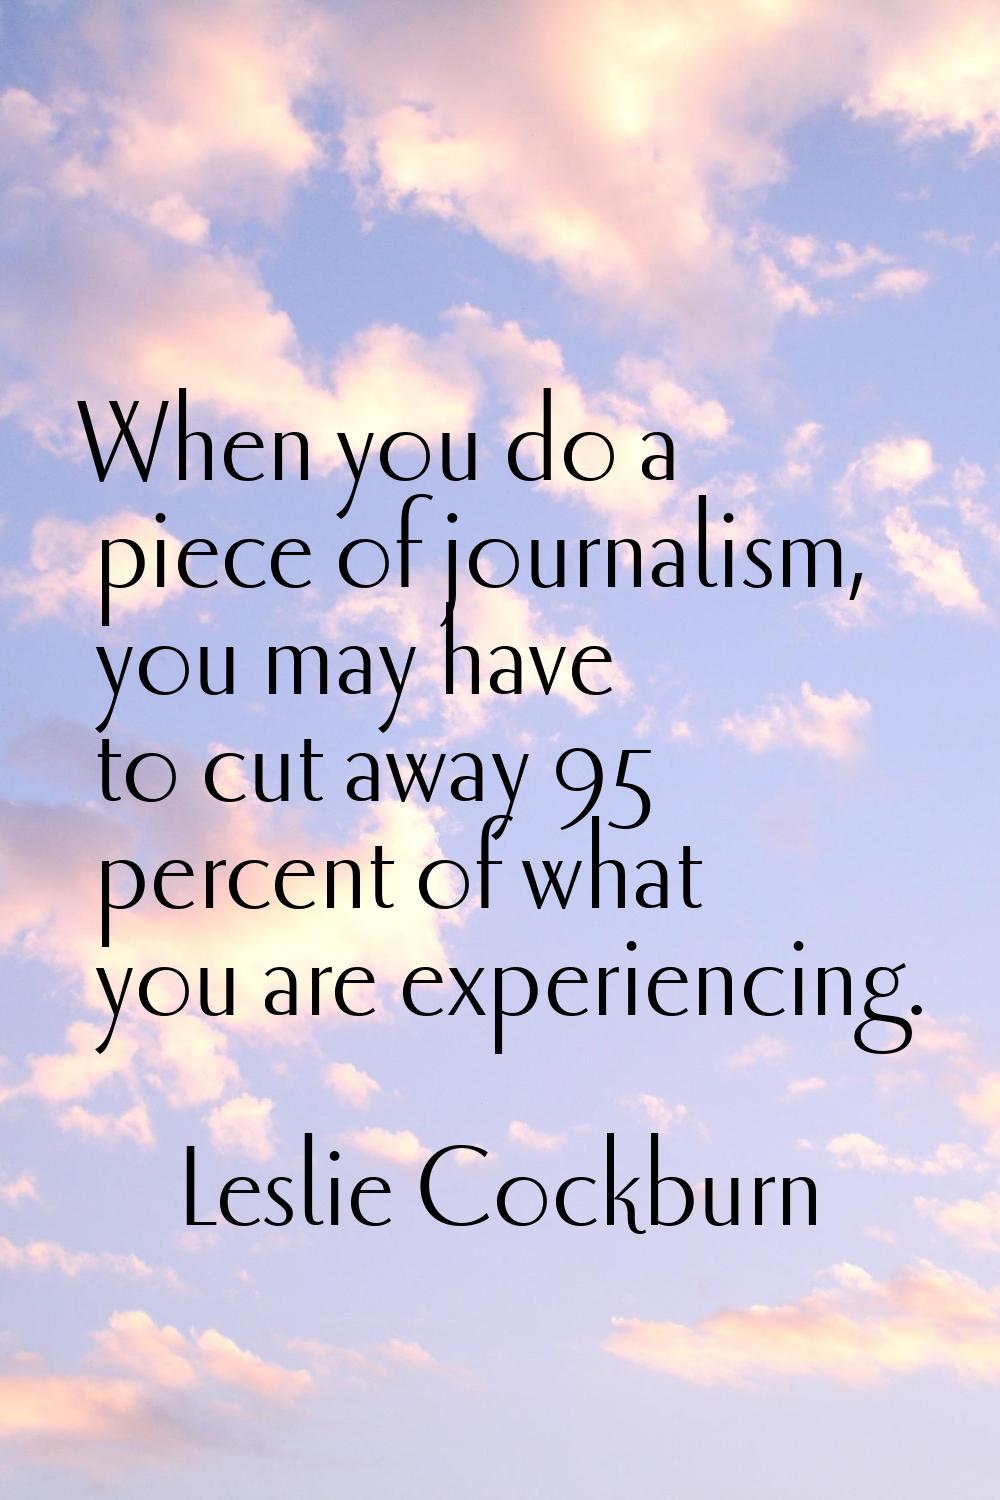 When you do a piece of journalism, you may have to cut away 95 percent of what you are experiencing